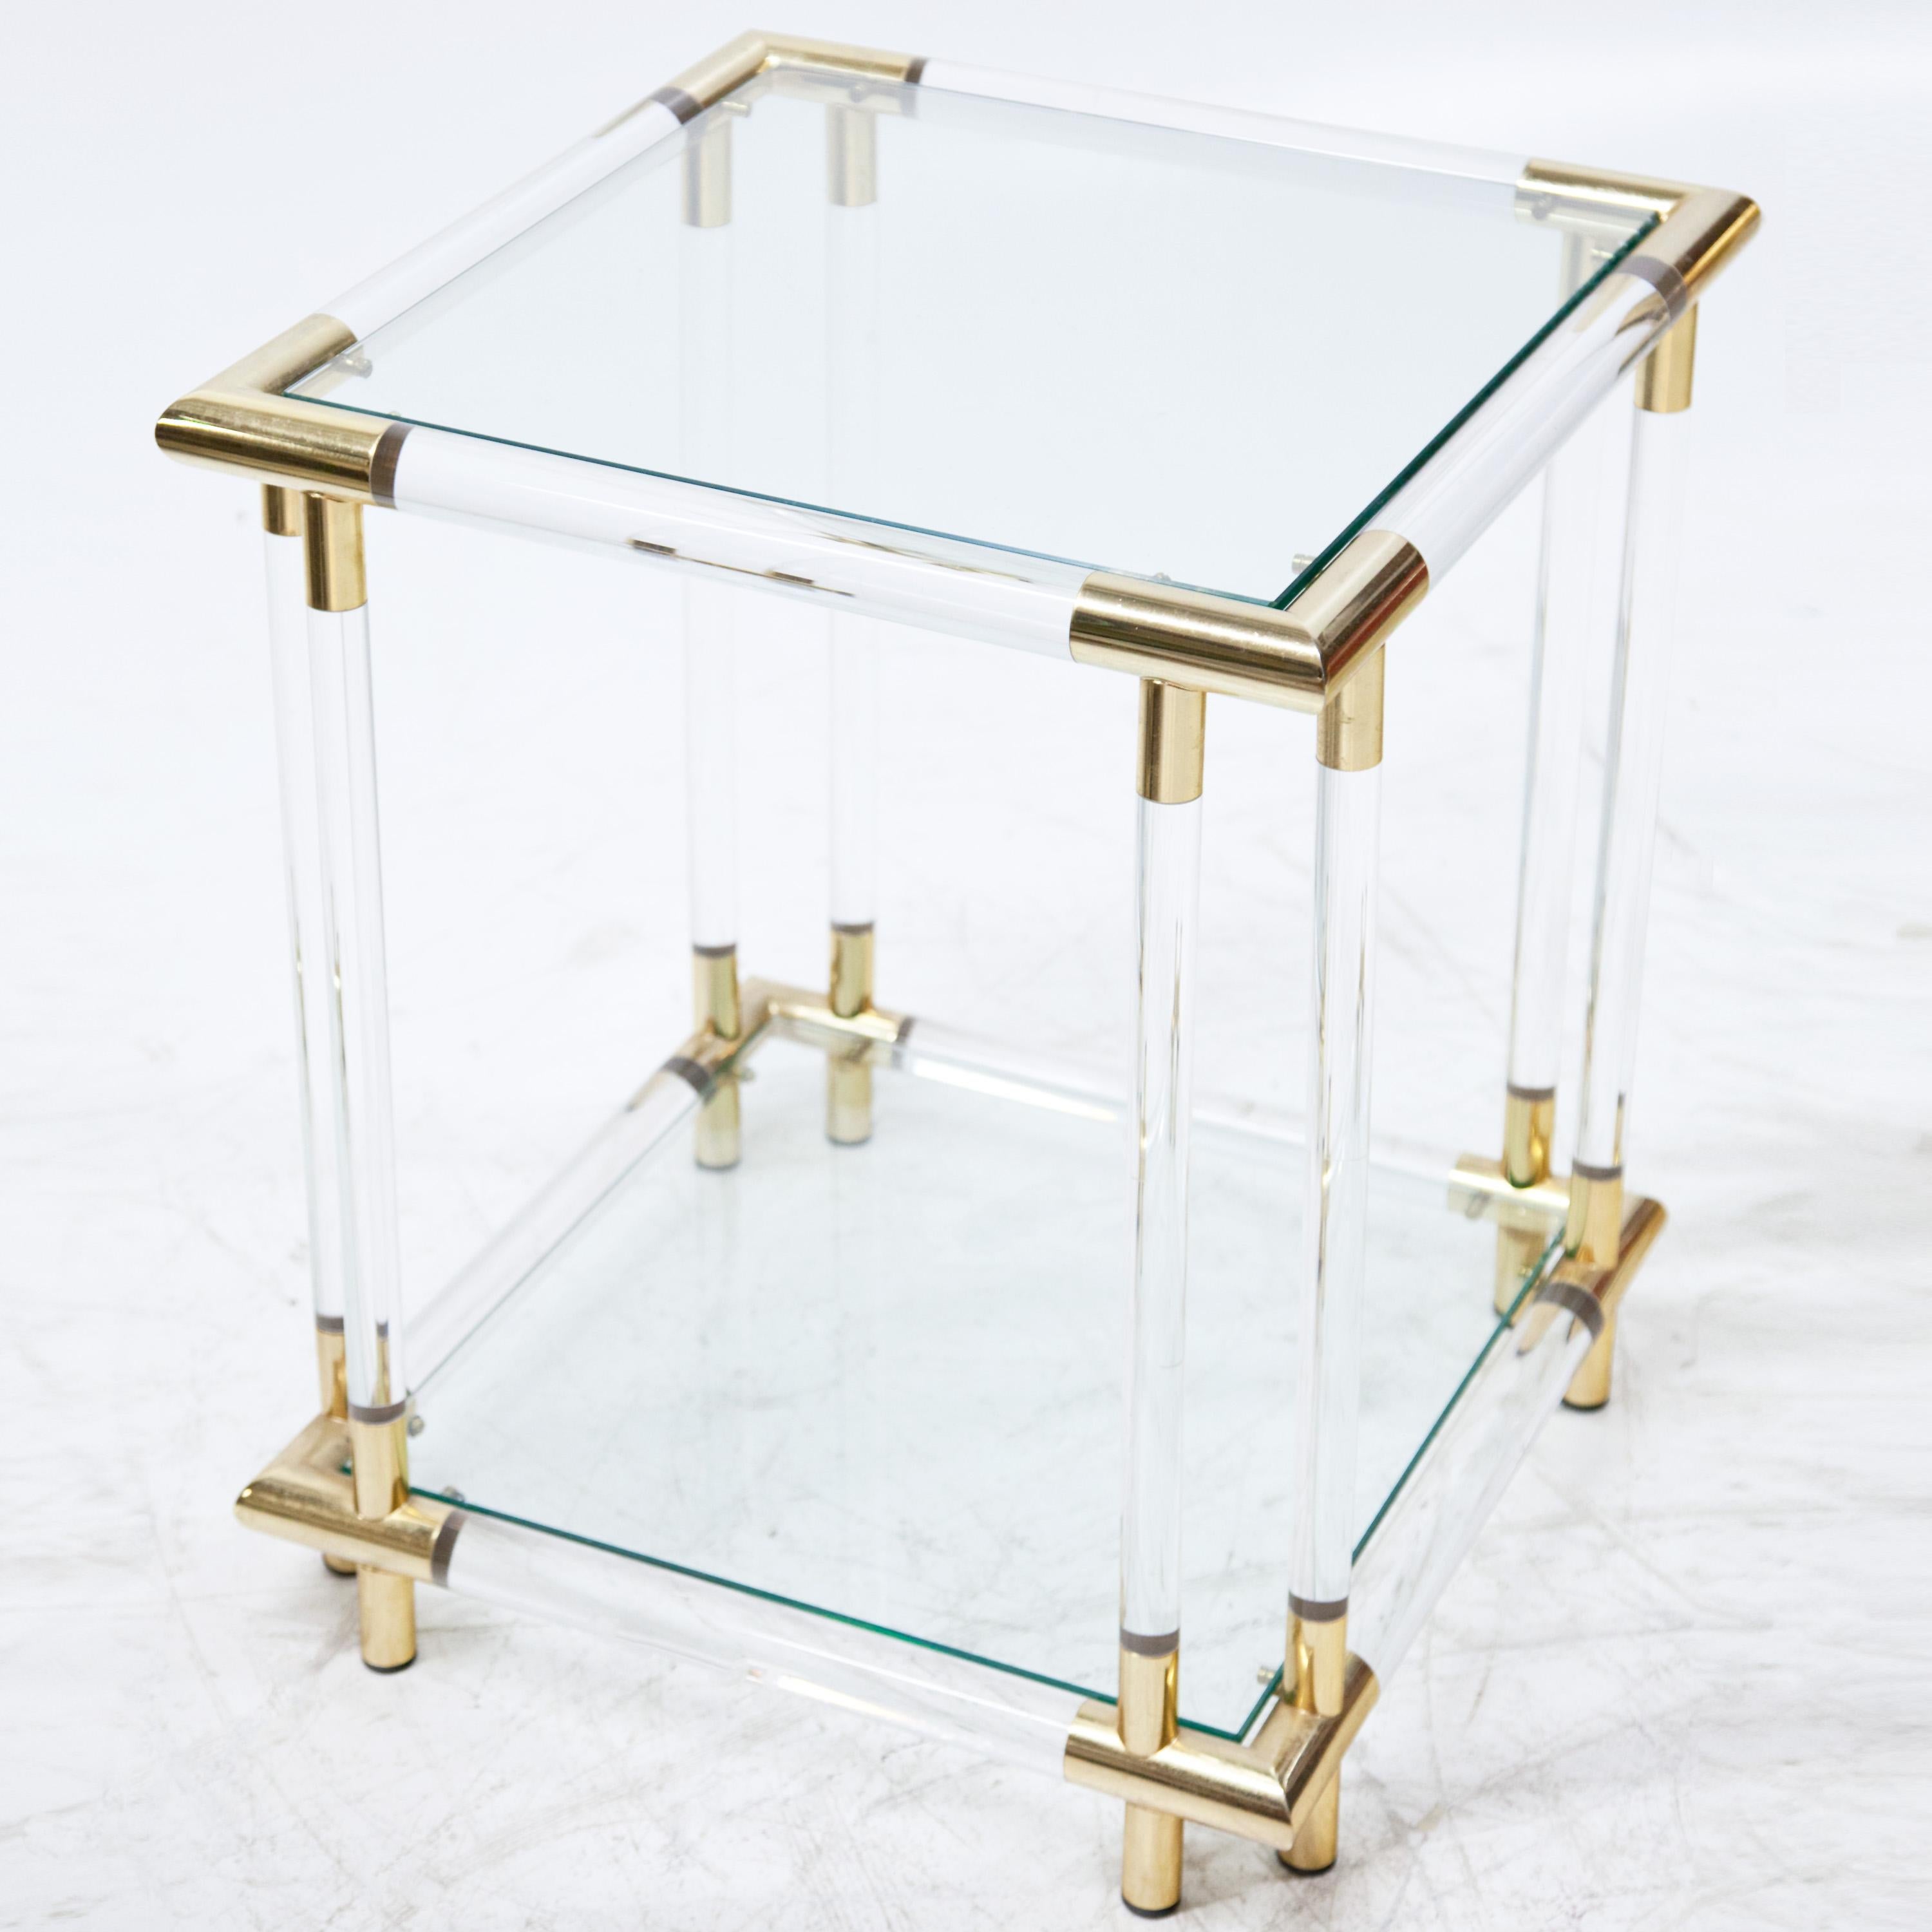 Pair of Side Tables im Zustand „Gut“ in New York, NY